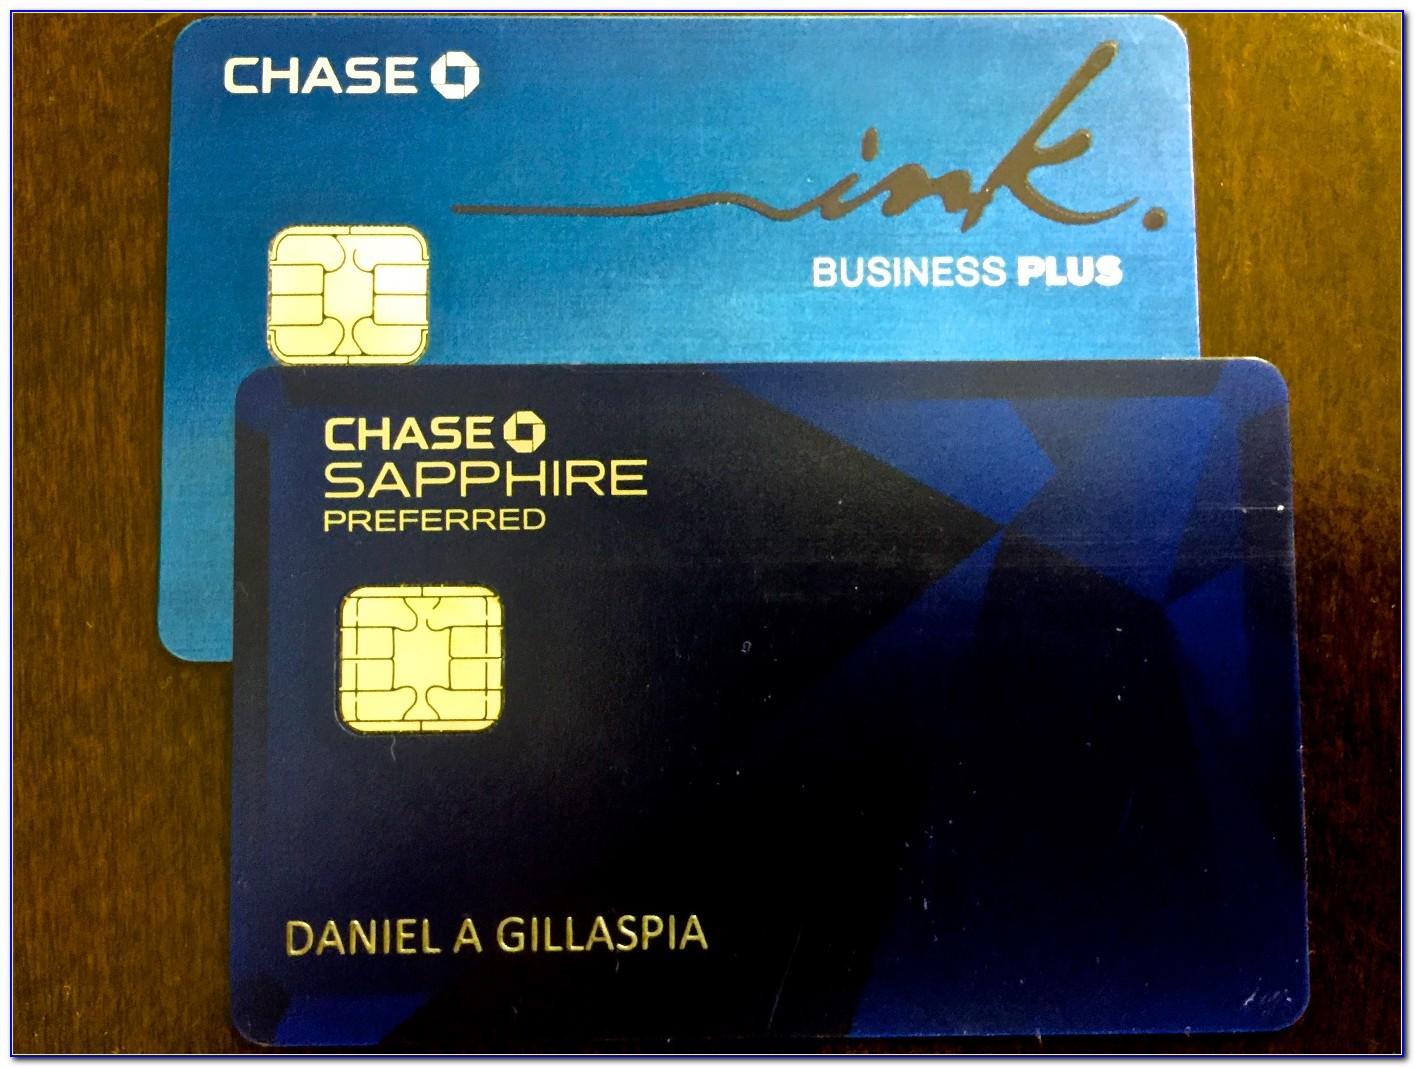 Chase Ink Business Preferred Card 100k